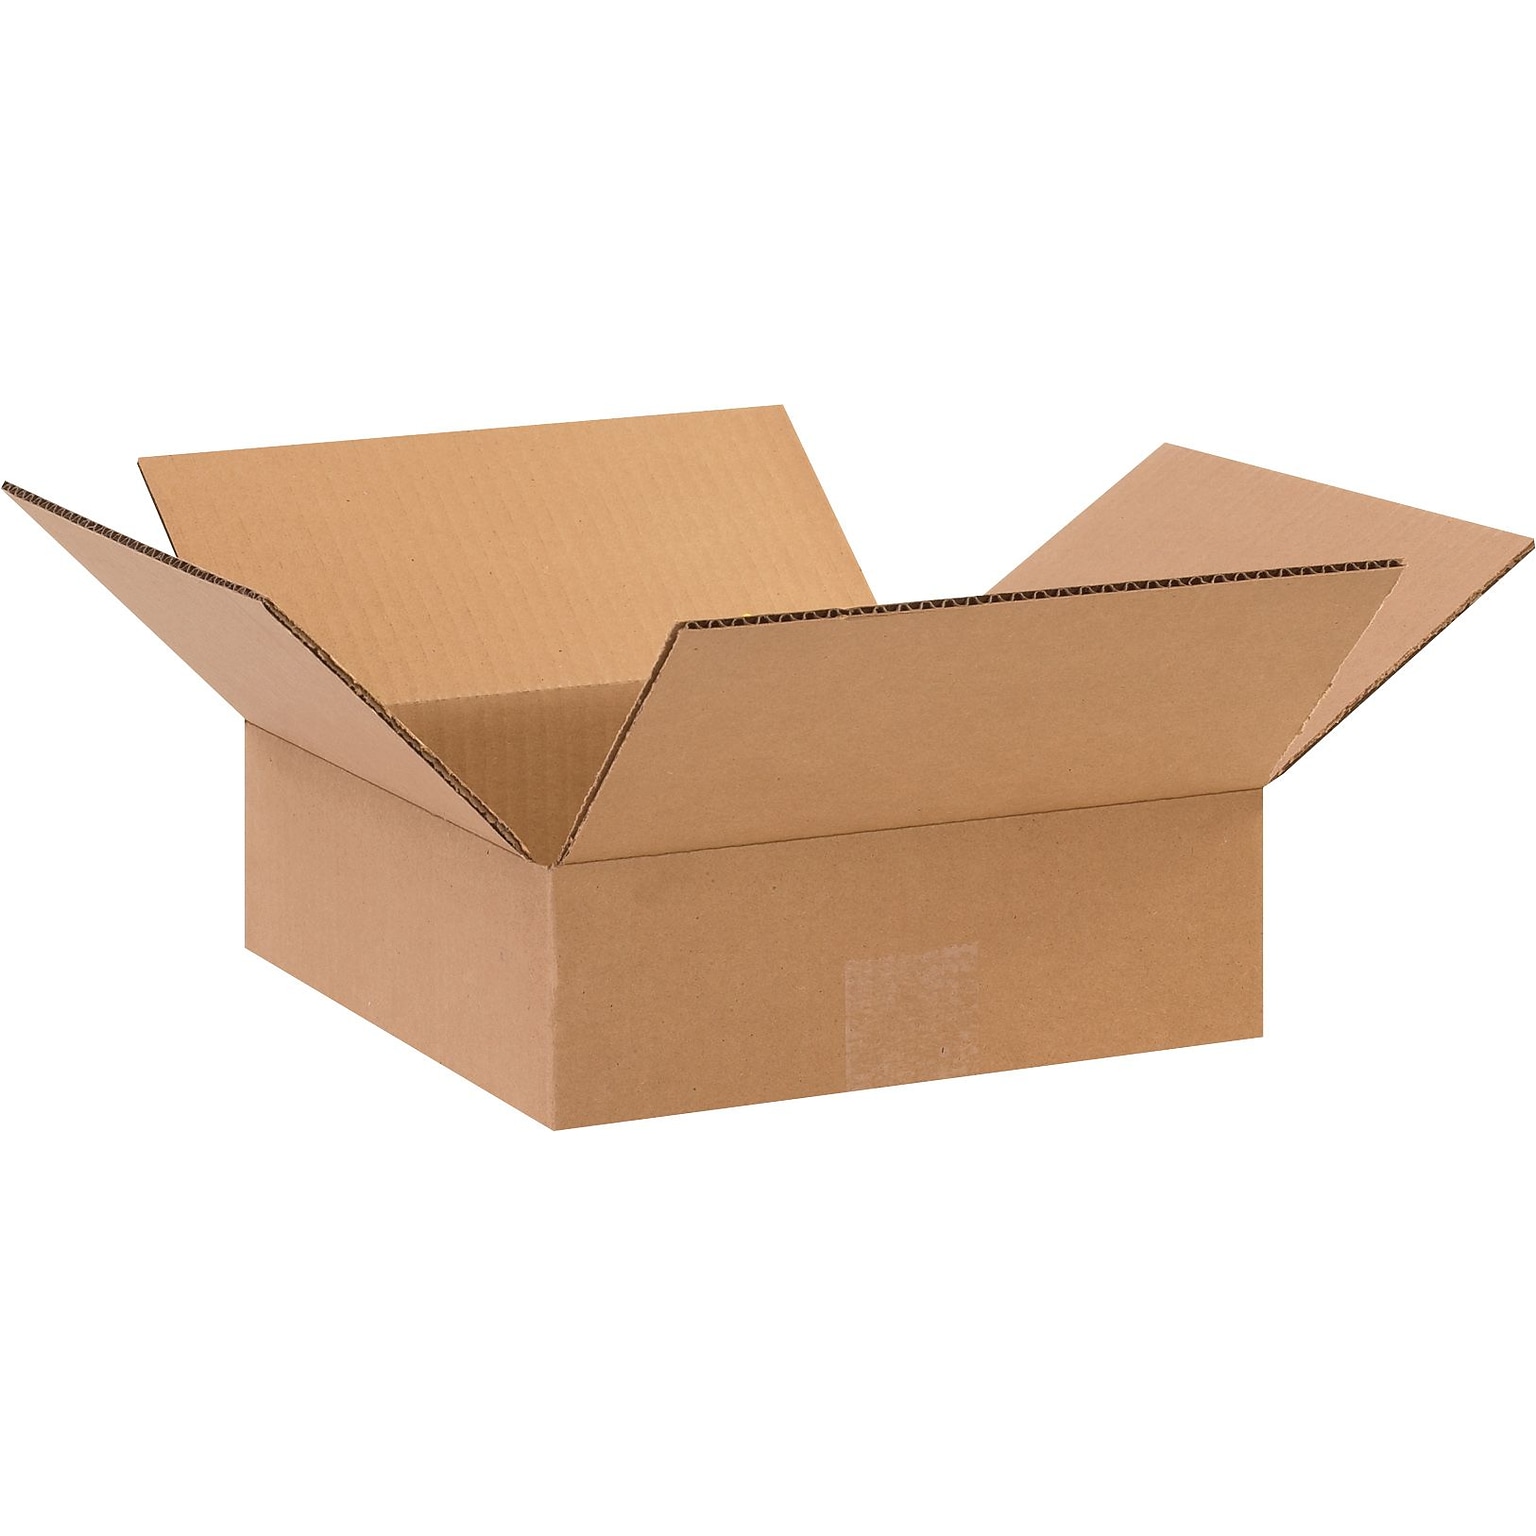 Quill Brand® Brand® 8 x 8 x 3 Shipping Boxes, 32 ECT, Brown, 25/Bundle (883)